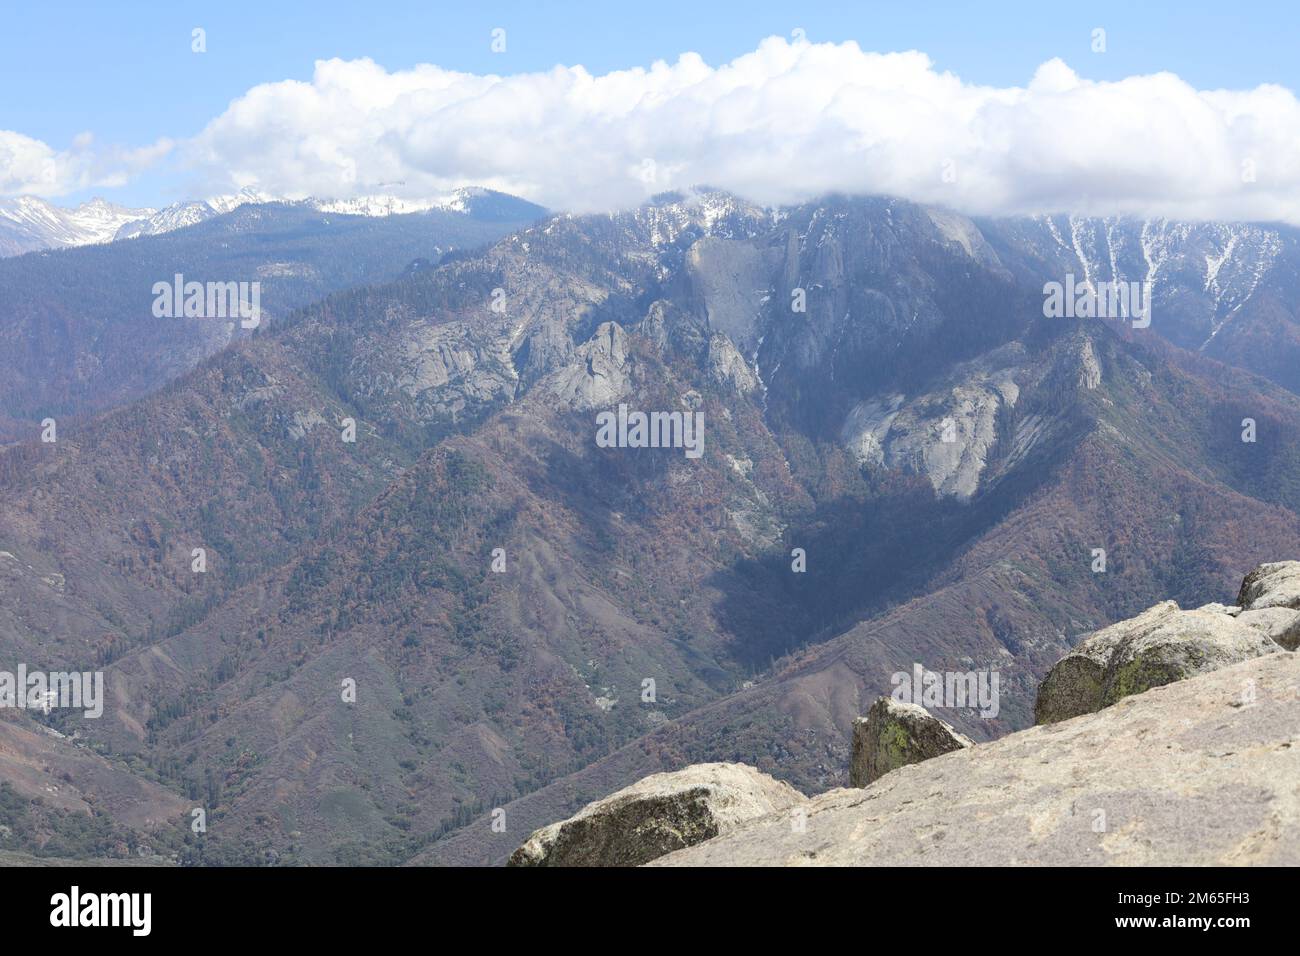 The wanderlust is here... Let's go! Great hike at the mountains with a wonderful weather and awesome views. Stock Photo